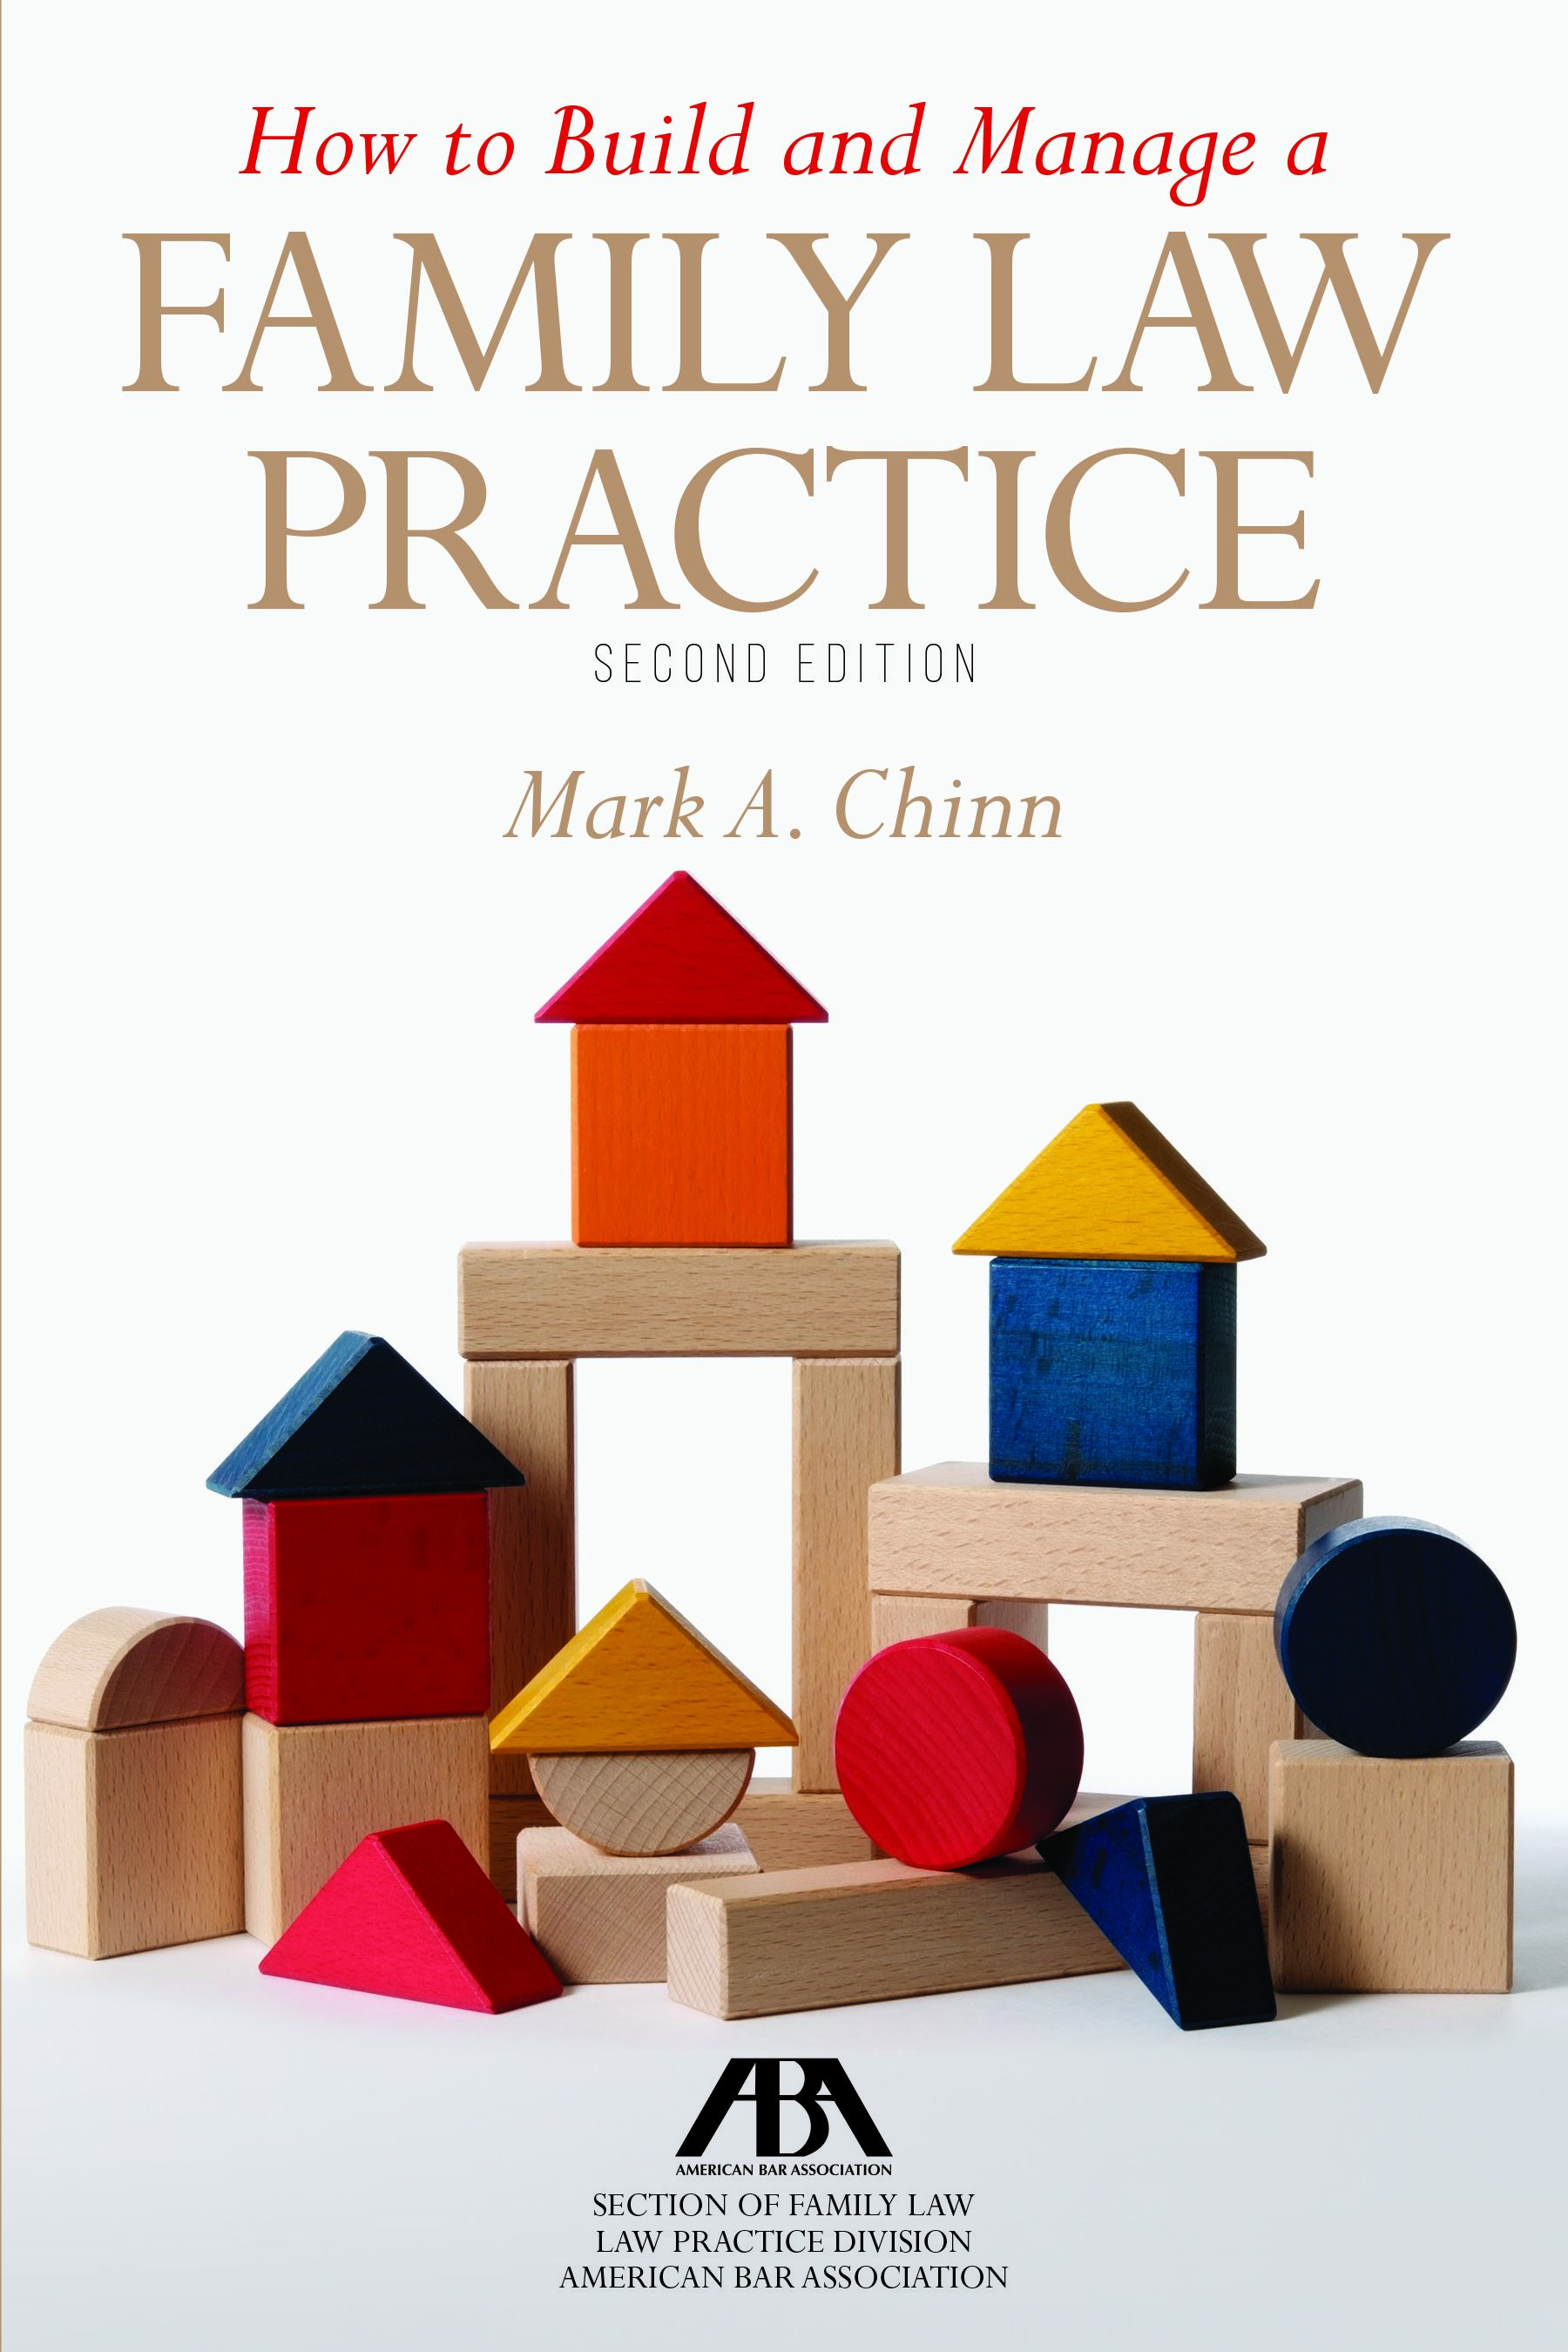 Book Image for How to Build and Manage a Family Law Practice, Second Edition